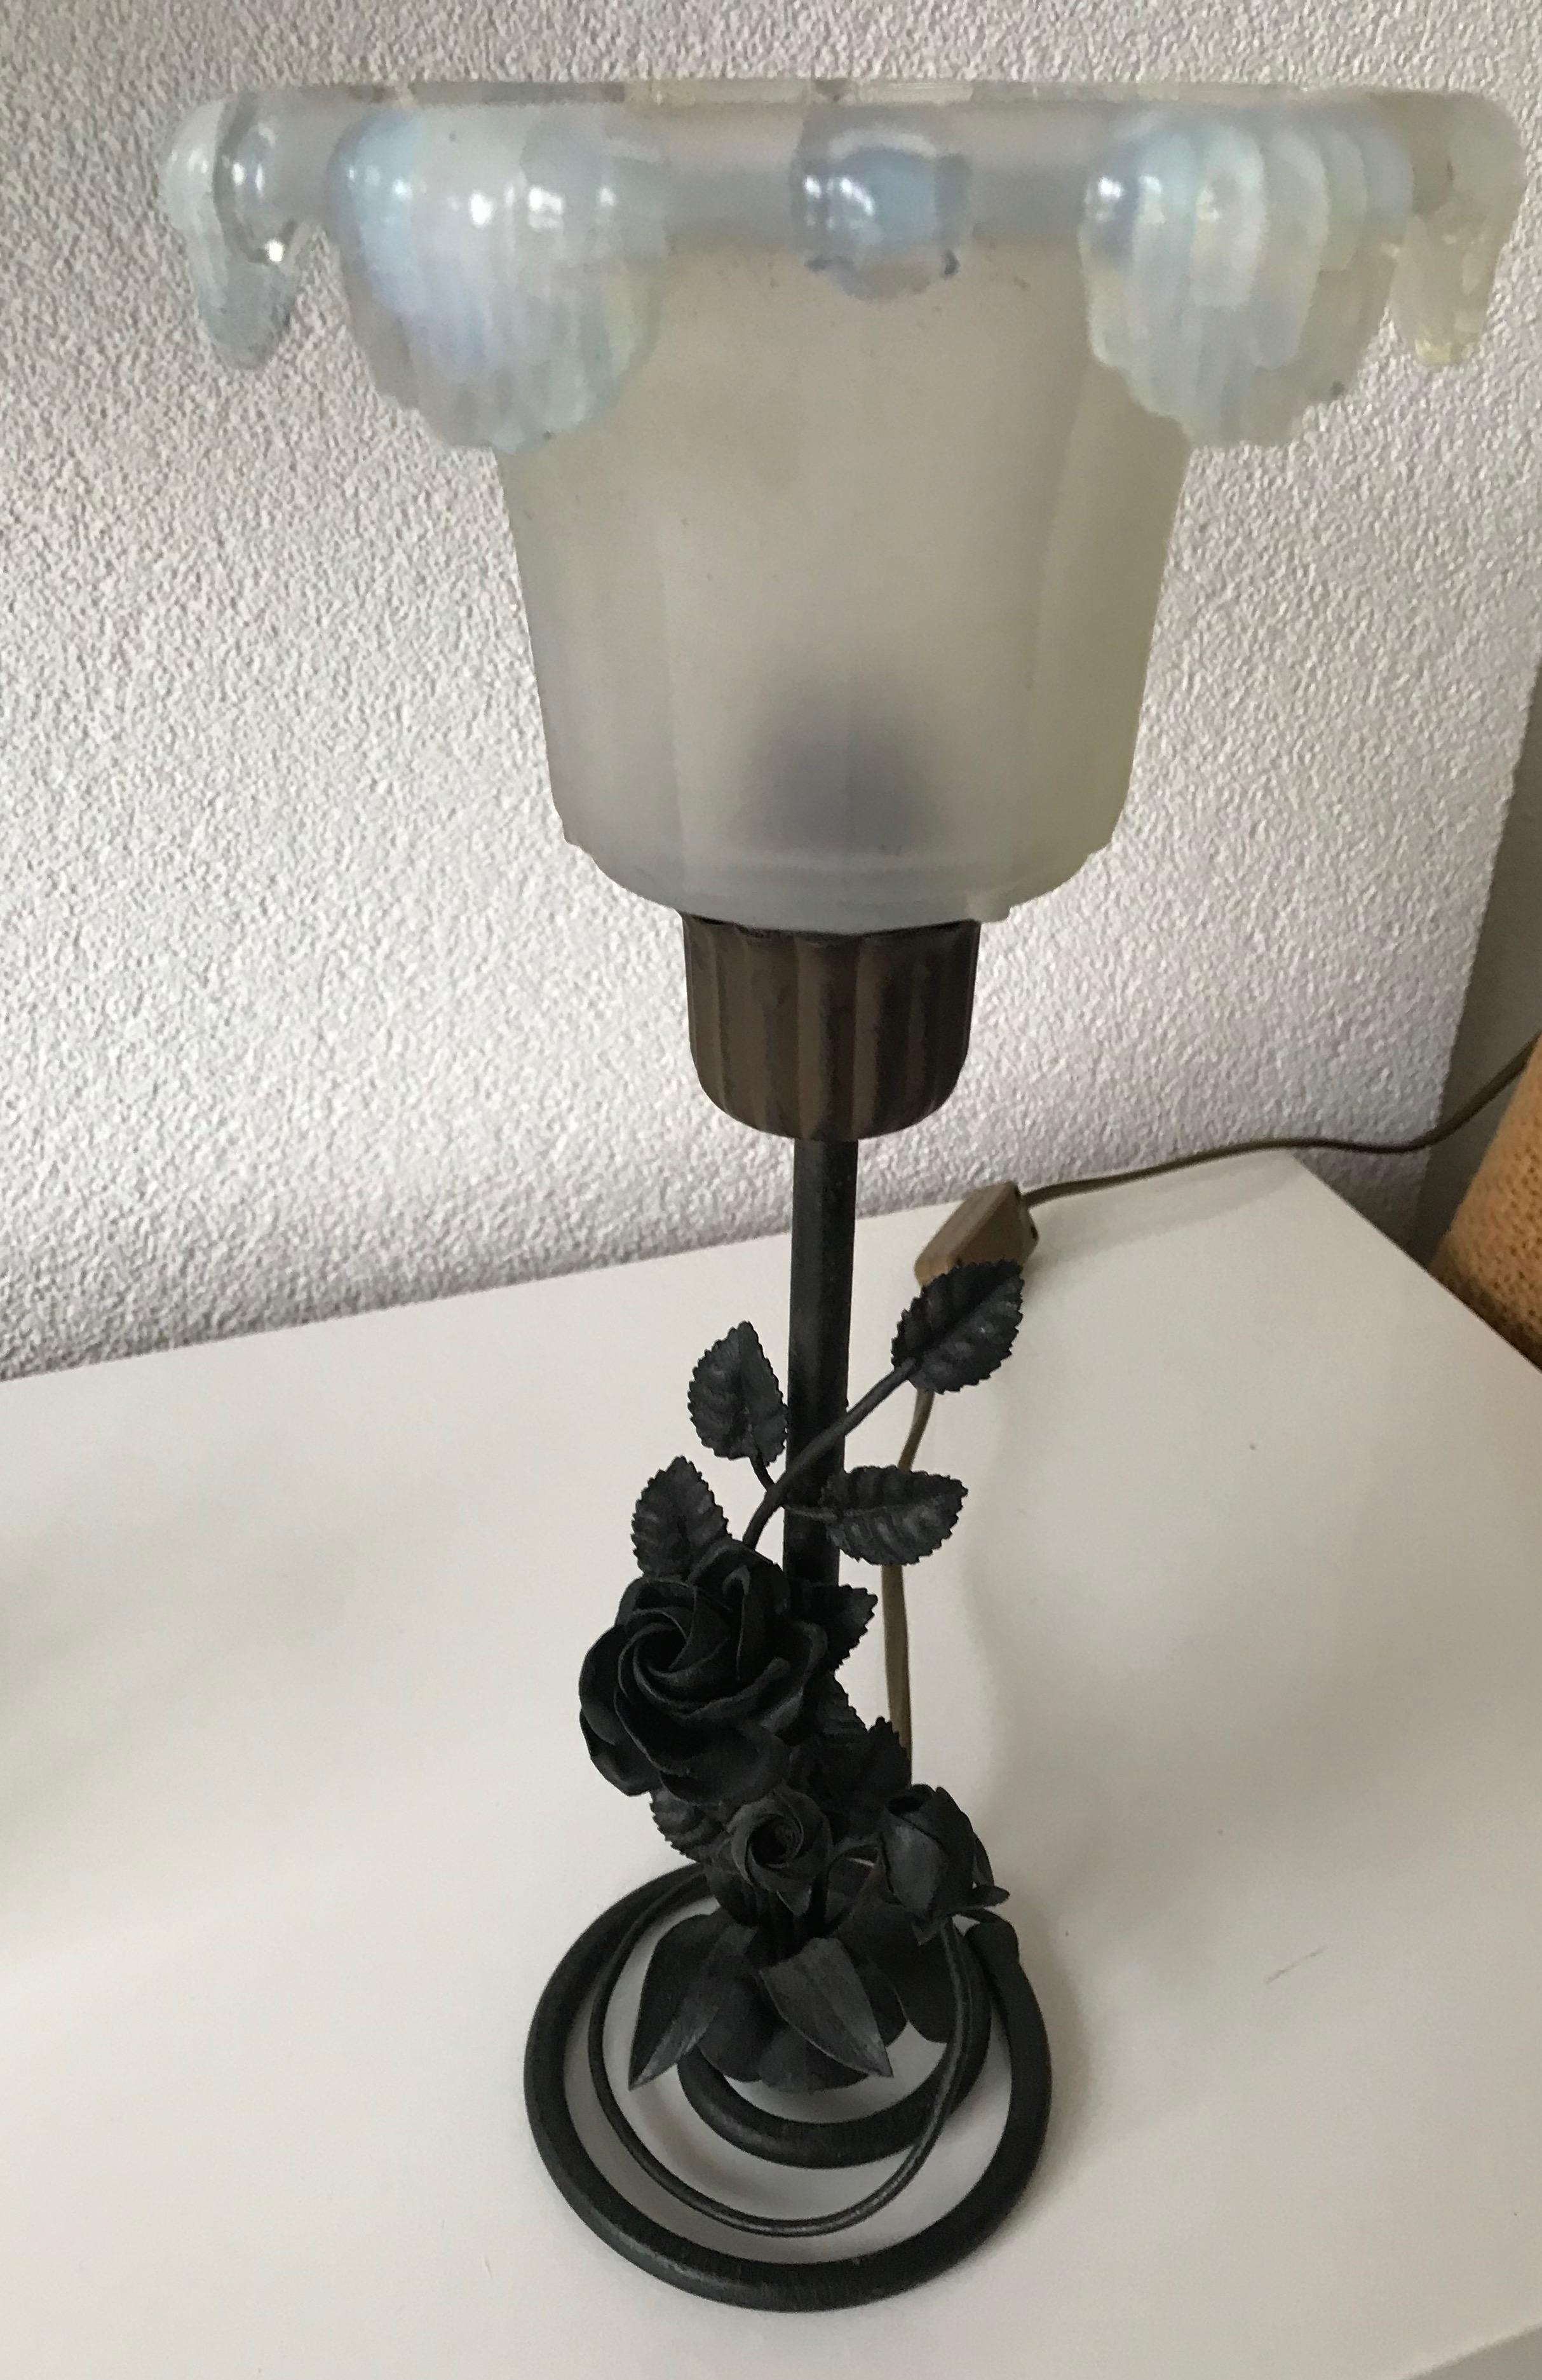 Rare 1920s wrought iron table lamp with a René Lalique style shade.

With perfectly hand forged branches, leaves and roses at the base of this finest workmanship table lamp, it is as sturdy and stable as the day it was made. The stunning glass shade